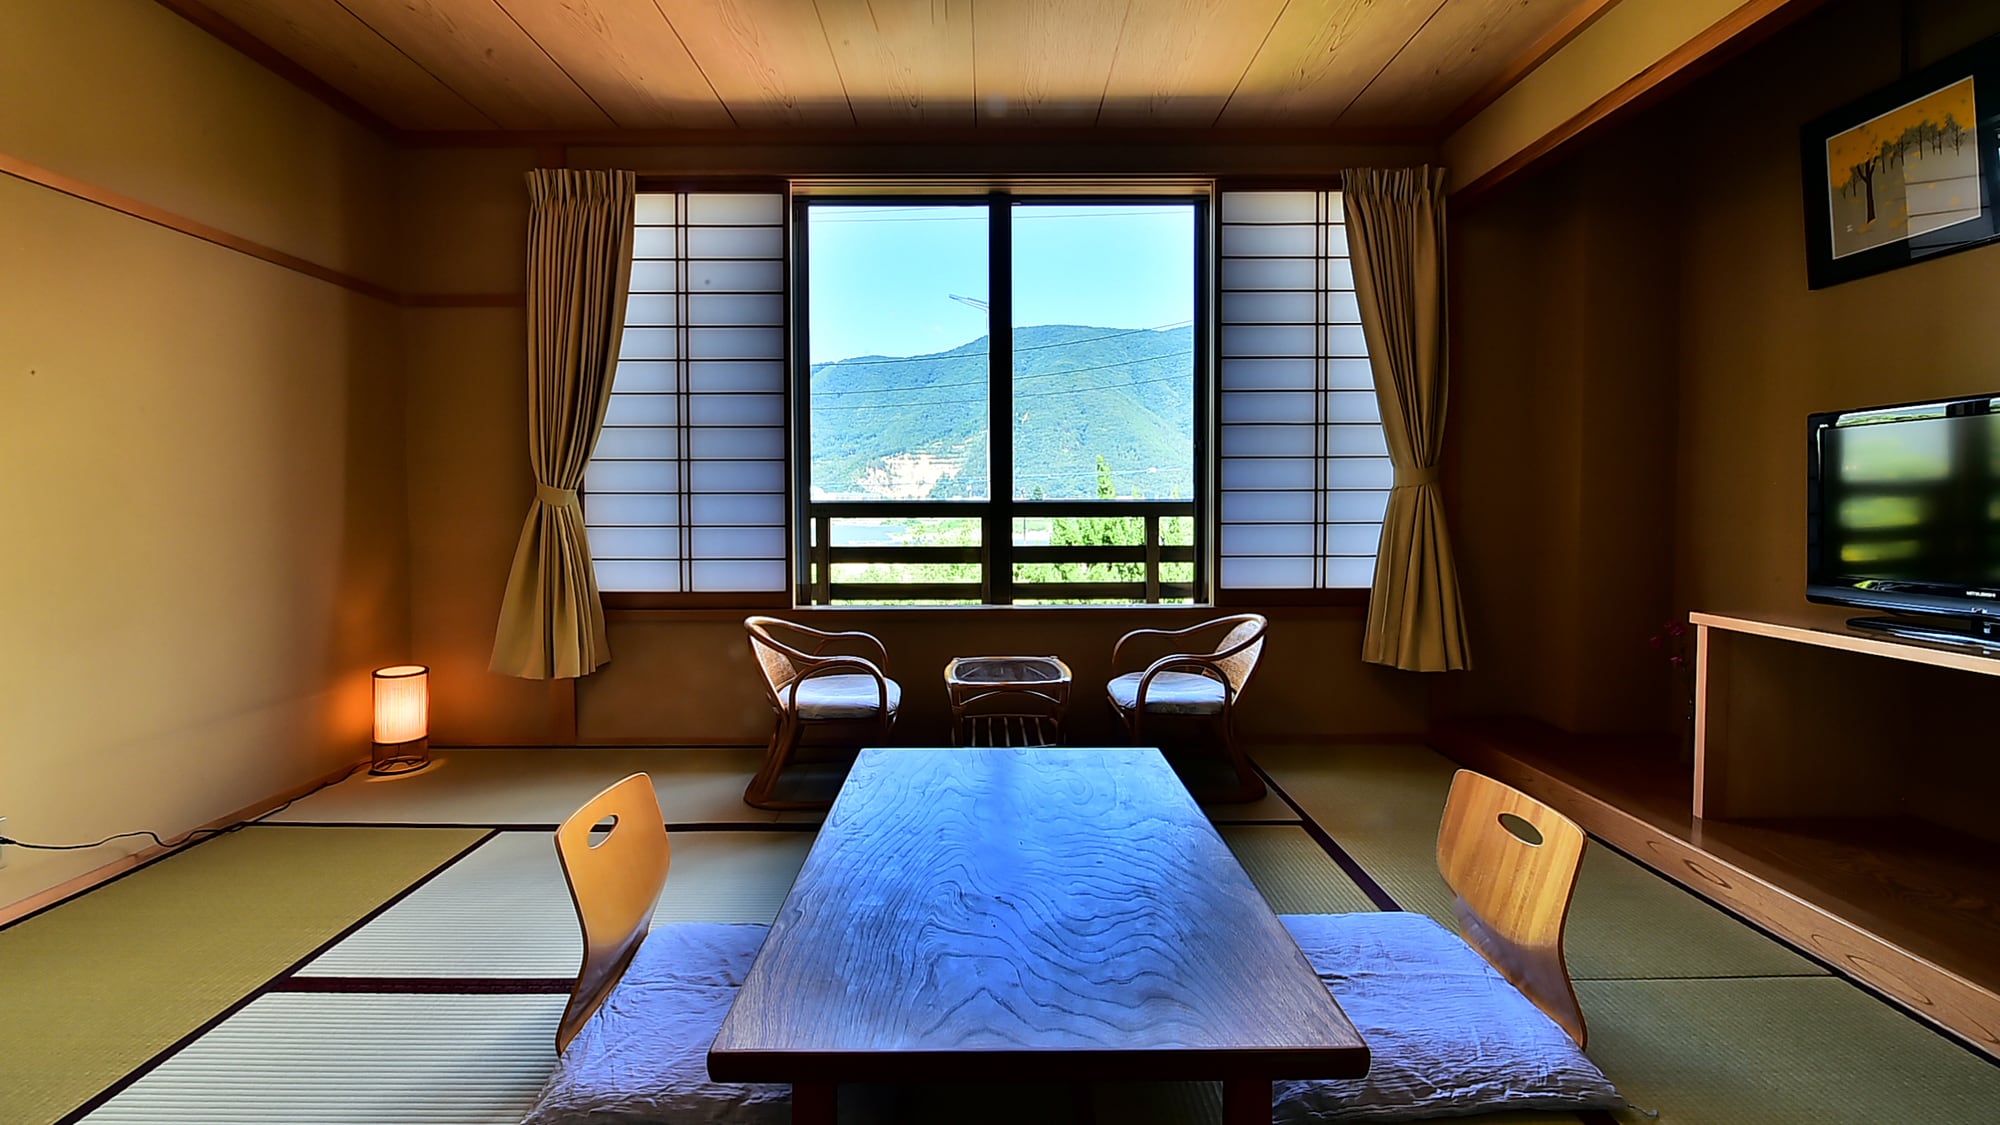  An example of a Japanese-style room in the main building "Tozenkaku"